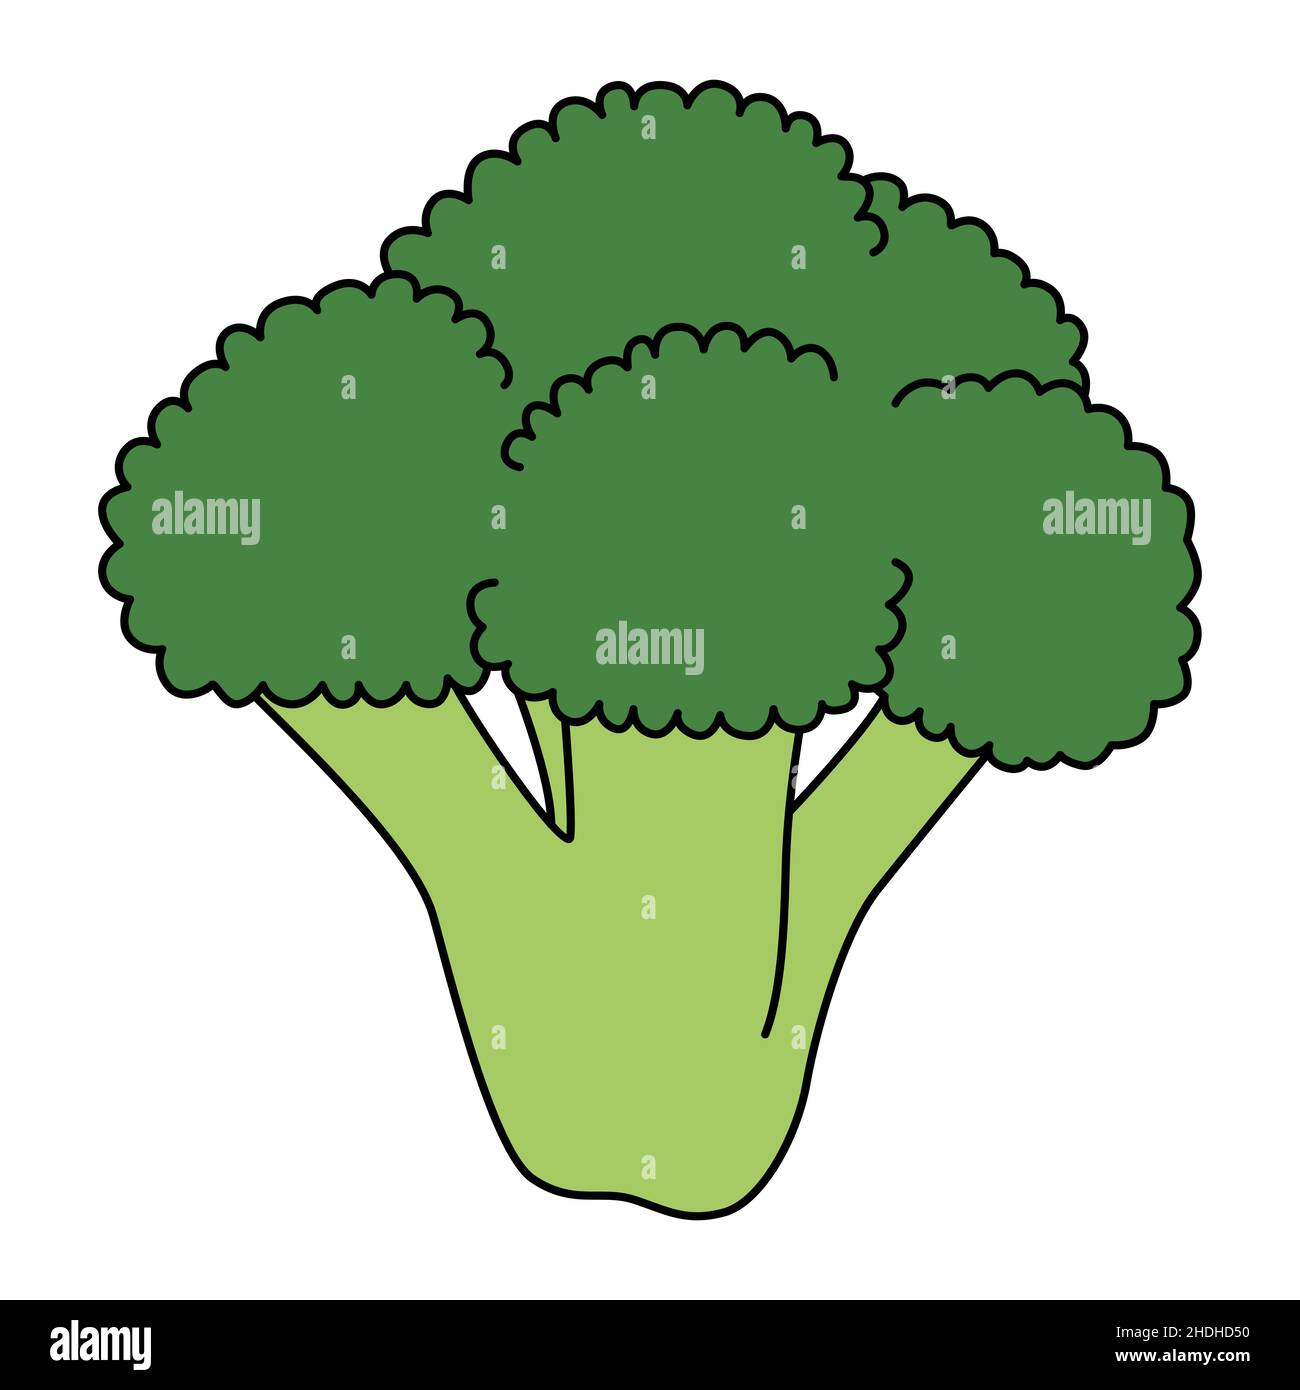 Cartoon branch of broccoli. Colorful vegetable. Vector illustration isolated on white background Stock Vector